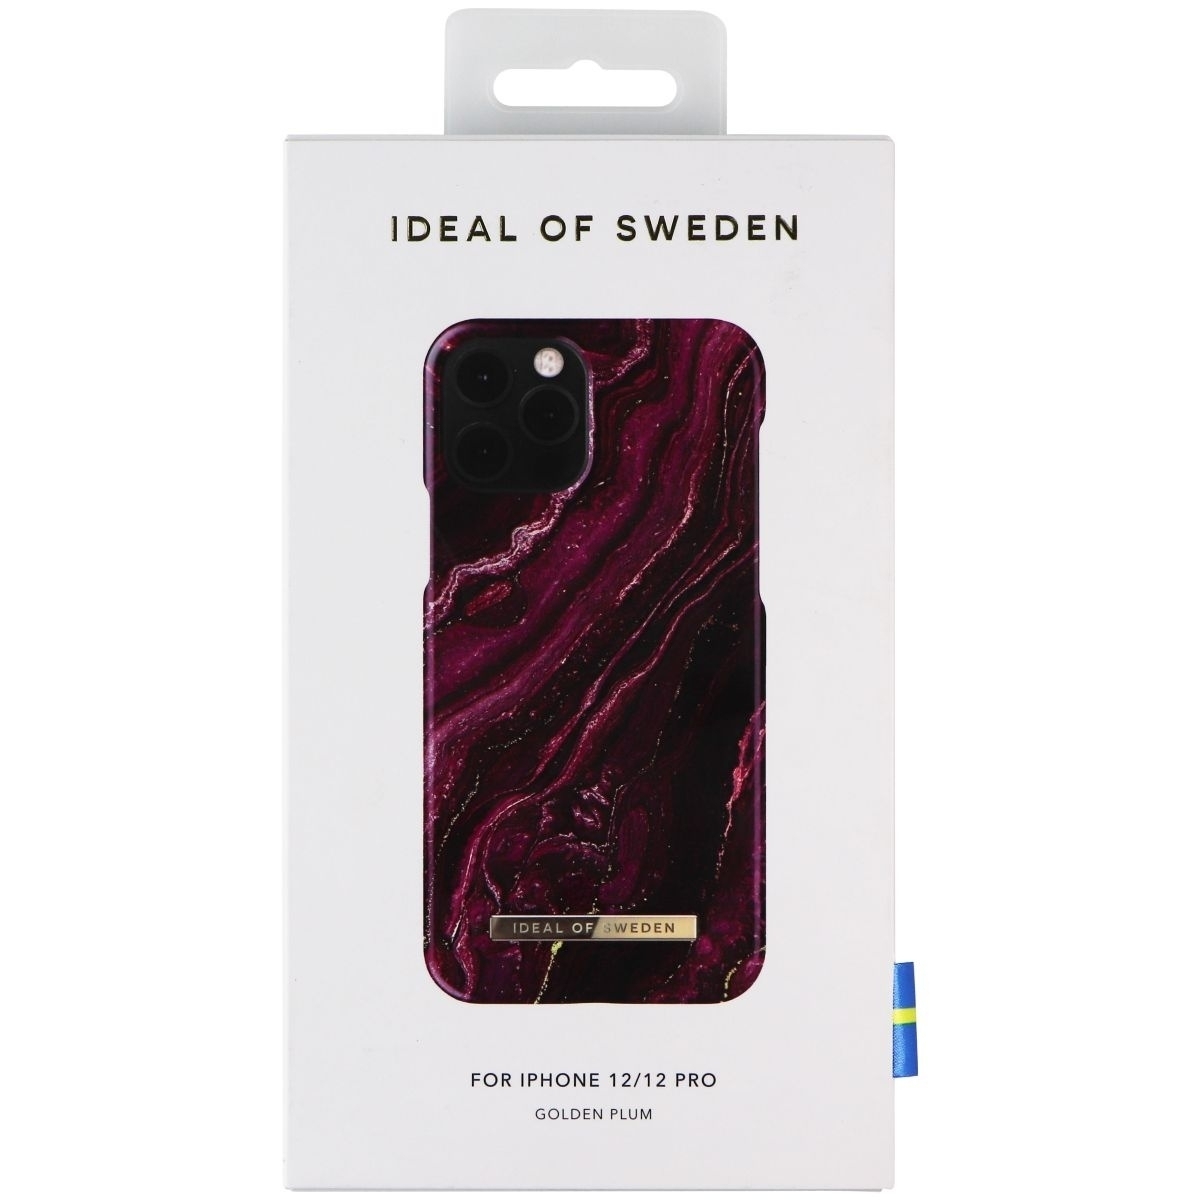 IDeal Of Sweden Hard Case For Apple IPhone 12 And 12 Pro - Golden Plum Purple